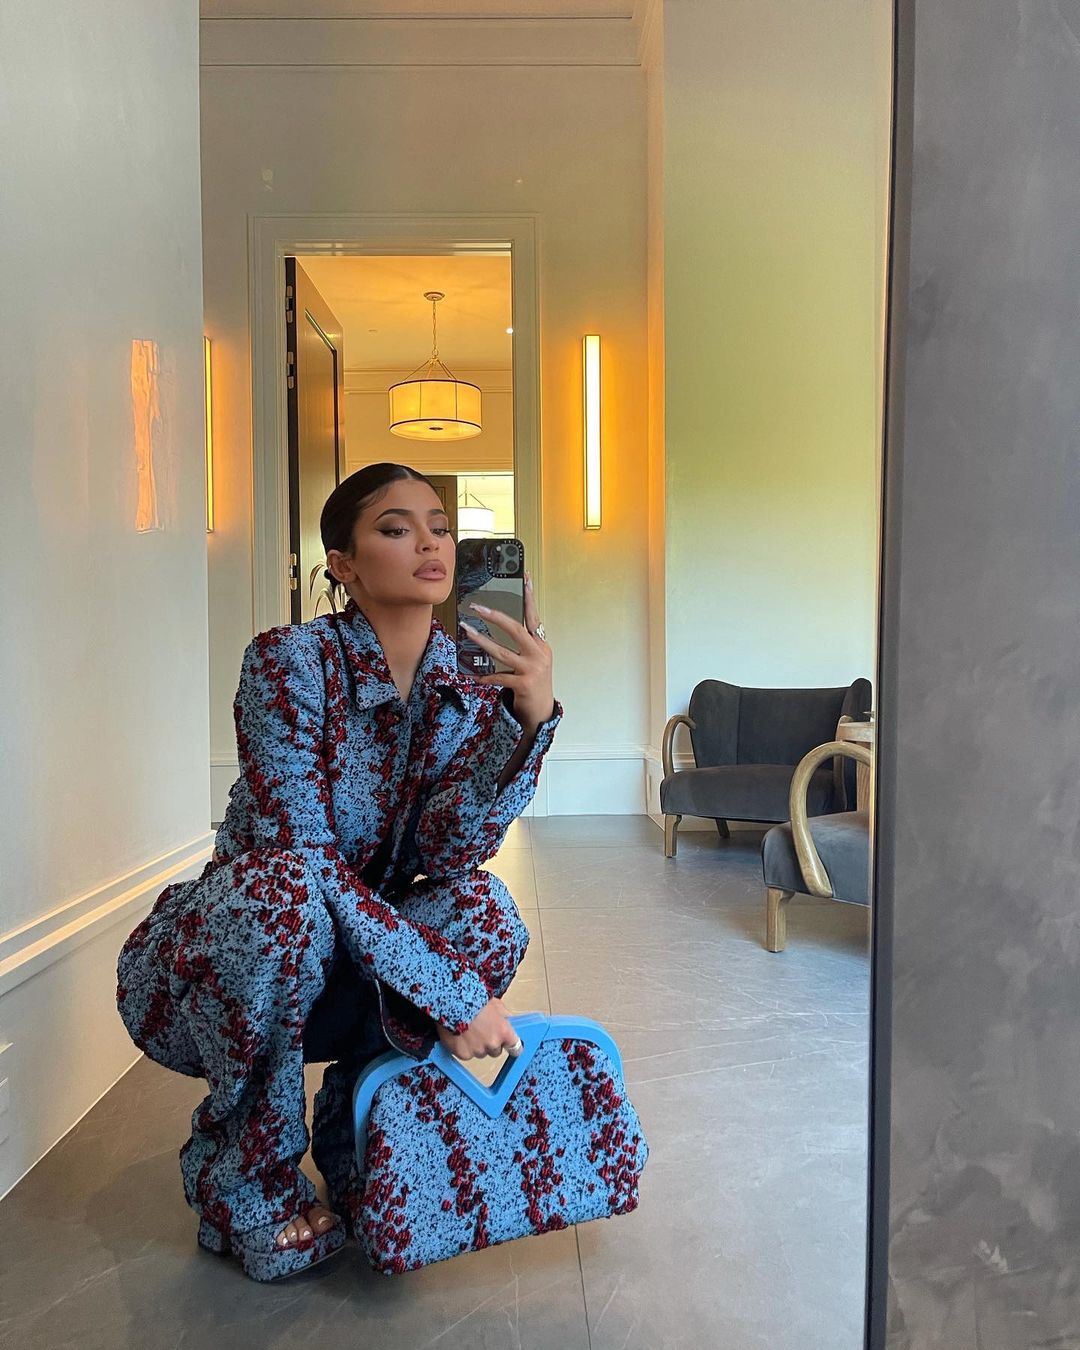 Kylie Jenner's Most Expensive Outfits and Accessories: Photos and